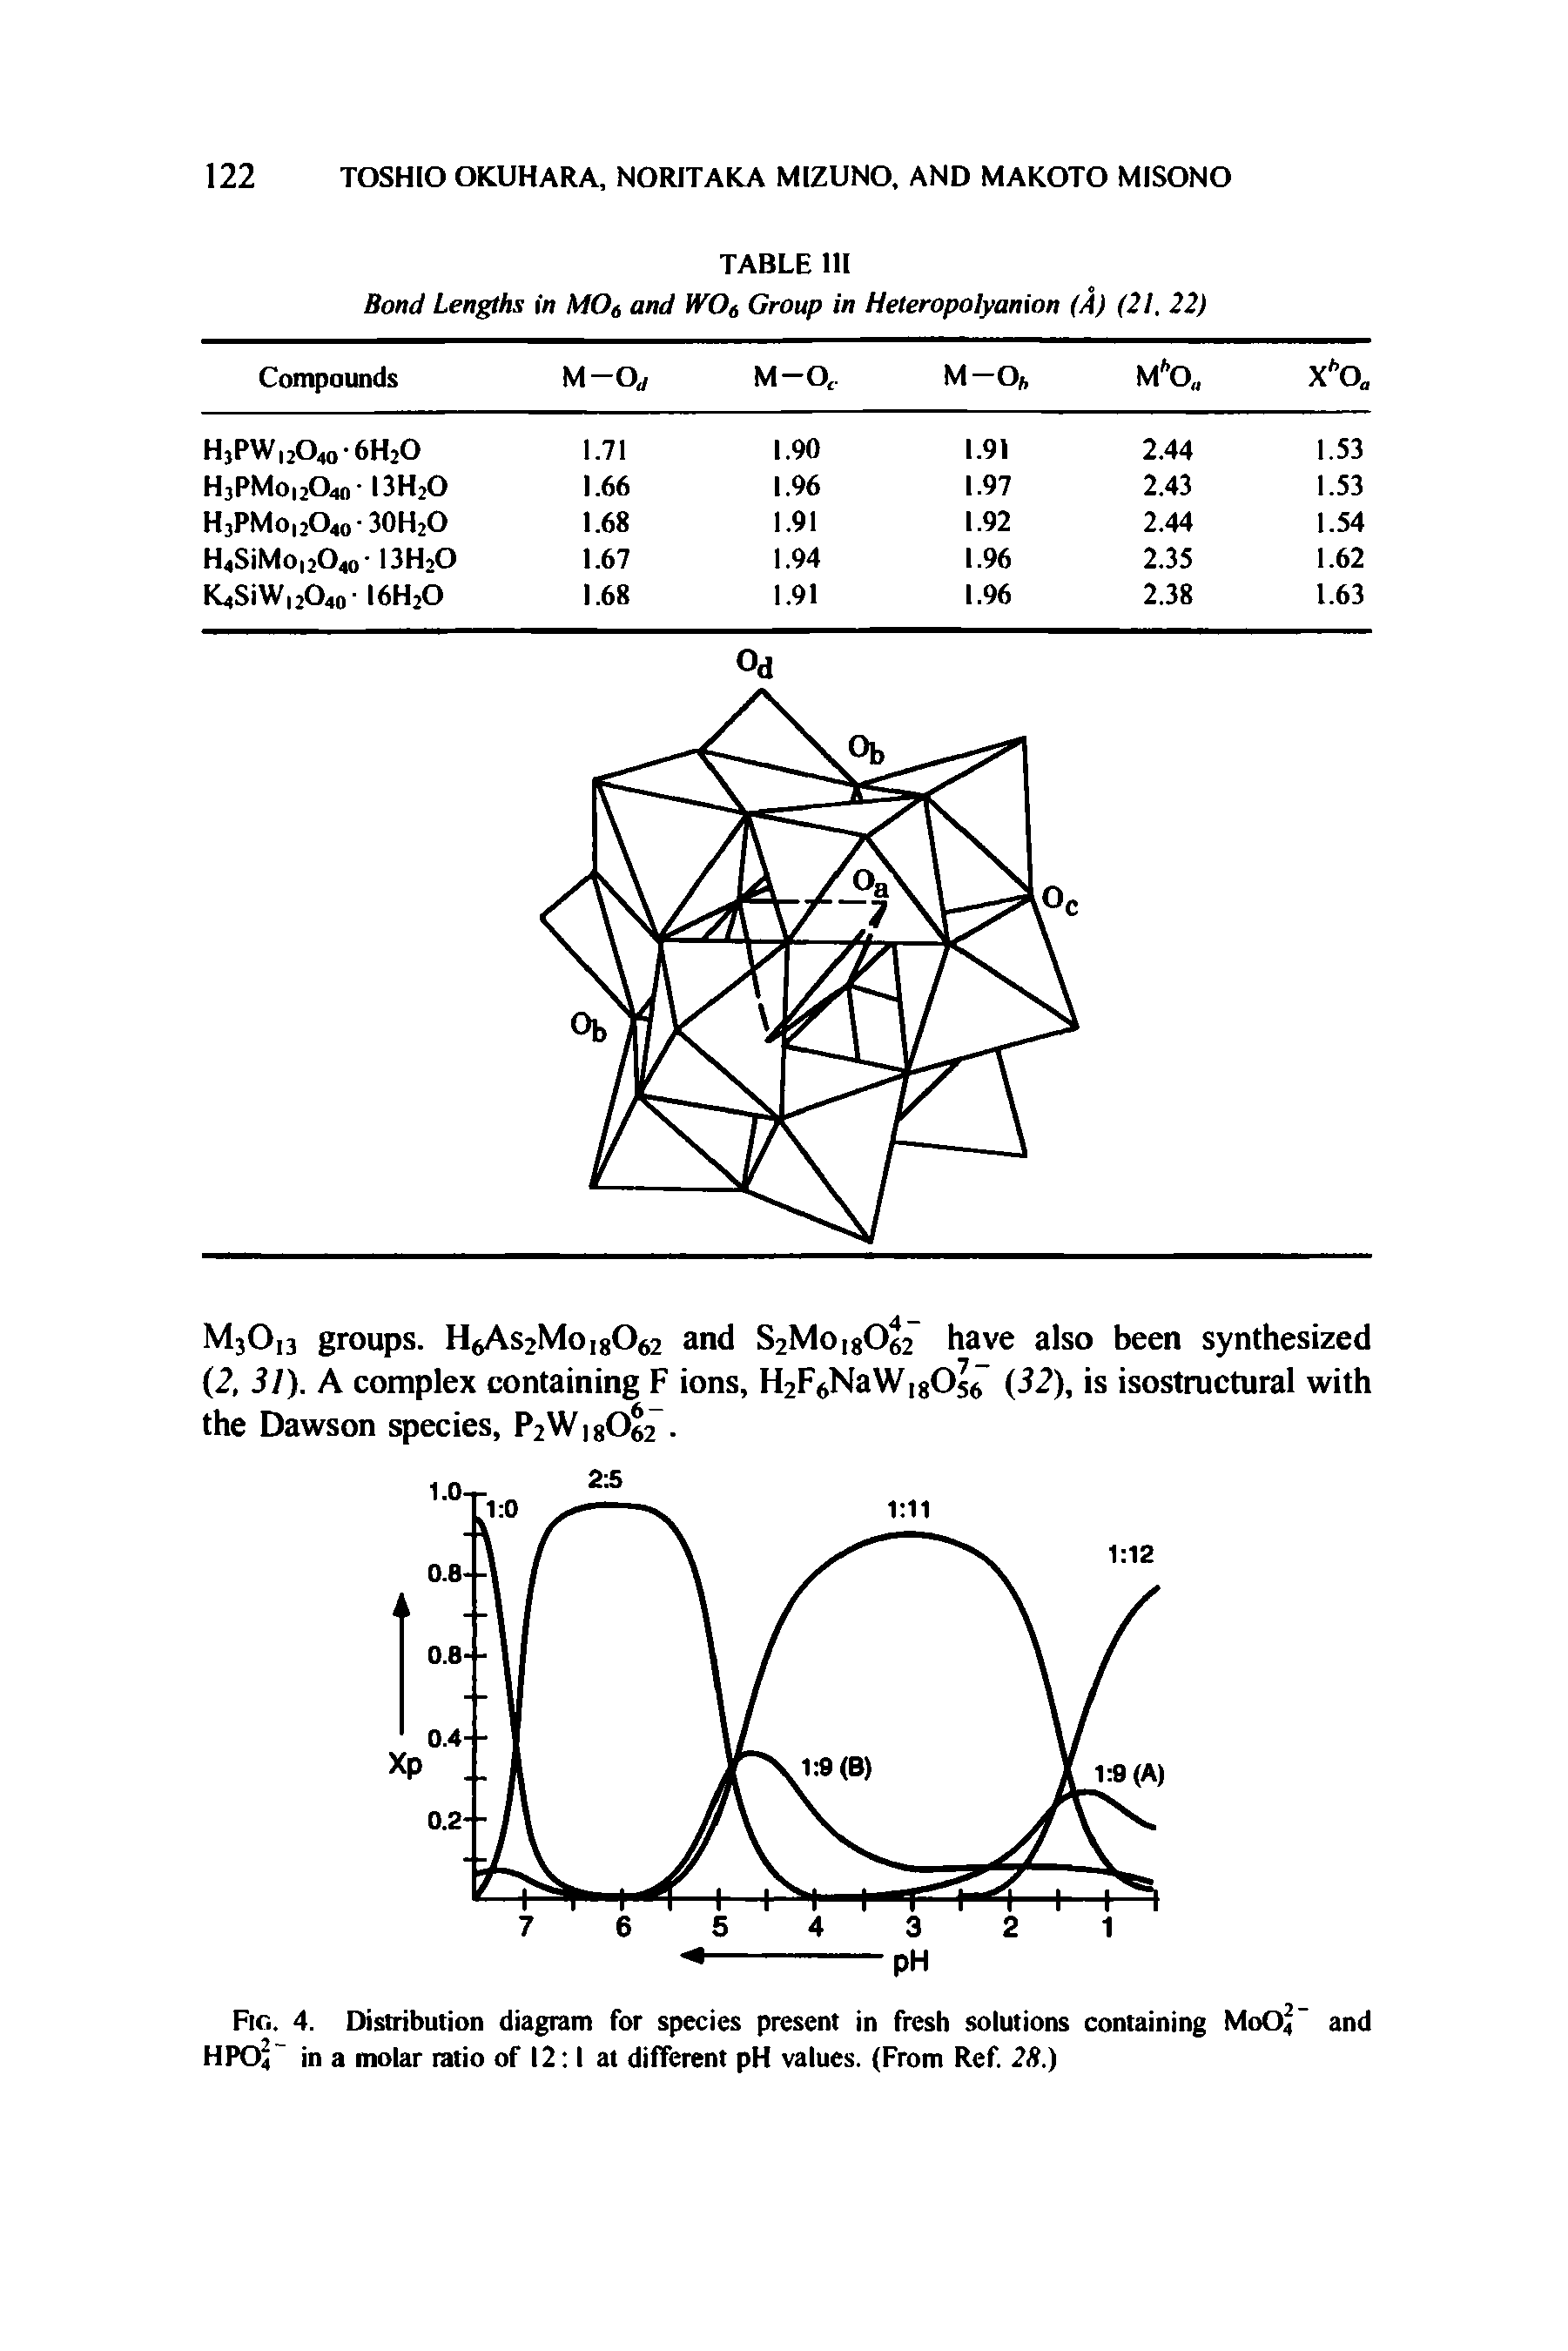 Fig. 4. Distribution diagram for species present in fresh solutions containing MoOj and HPC>4 in a molar ratio of 12 1 at different pH values. (From Ref. 28.)...